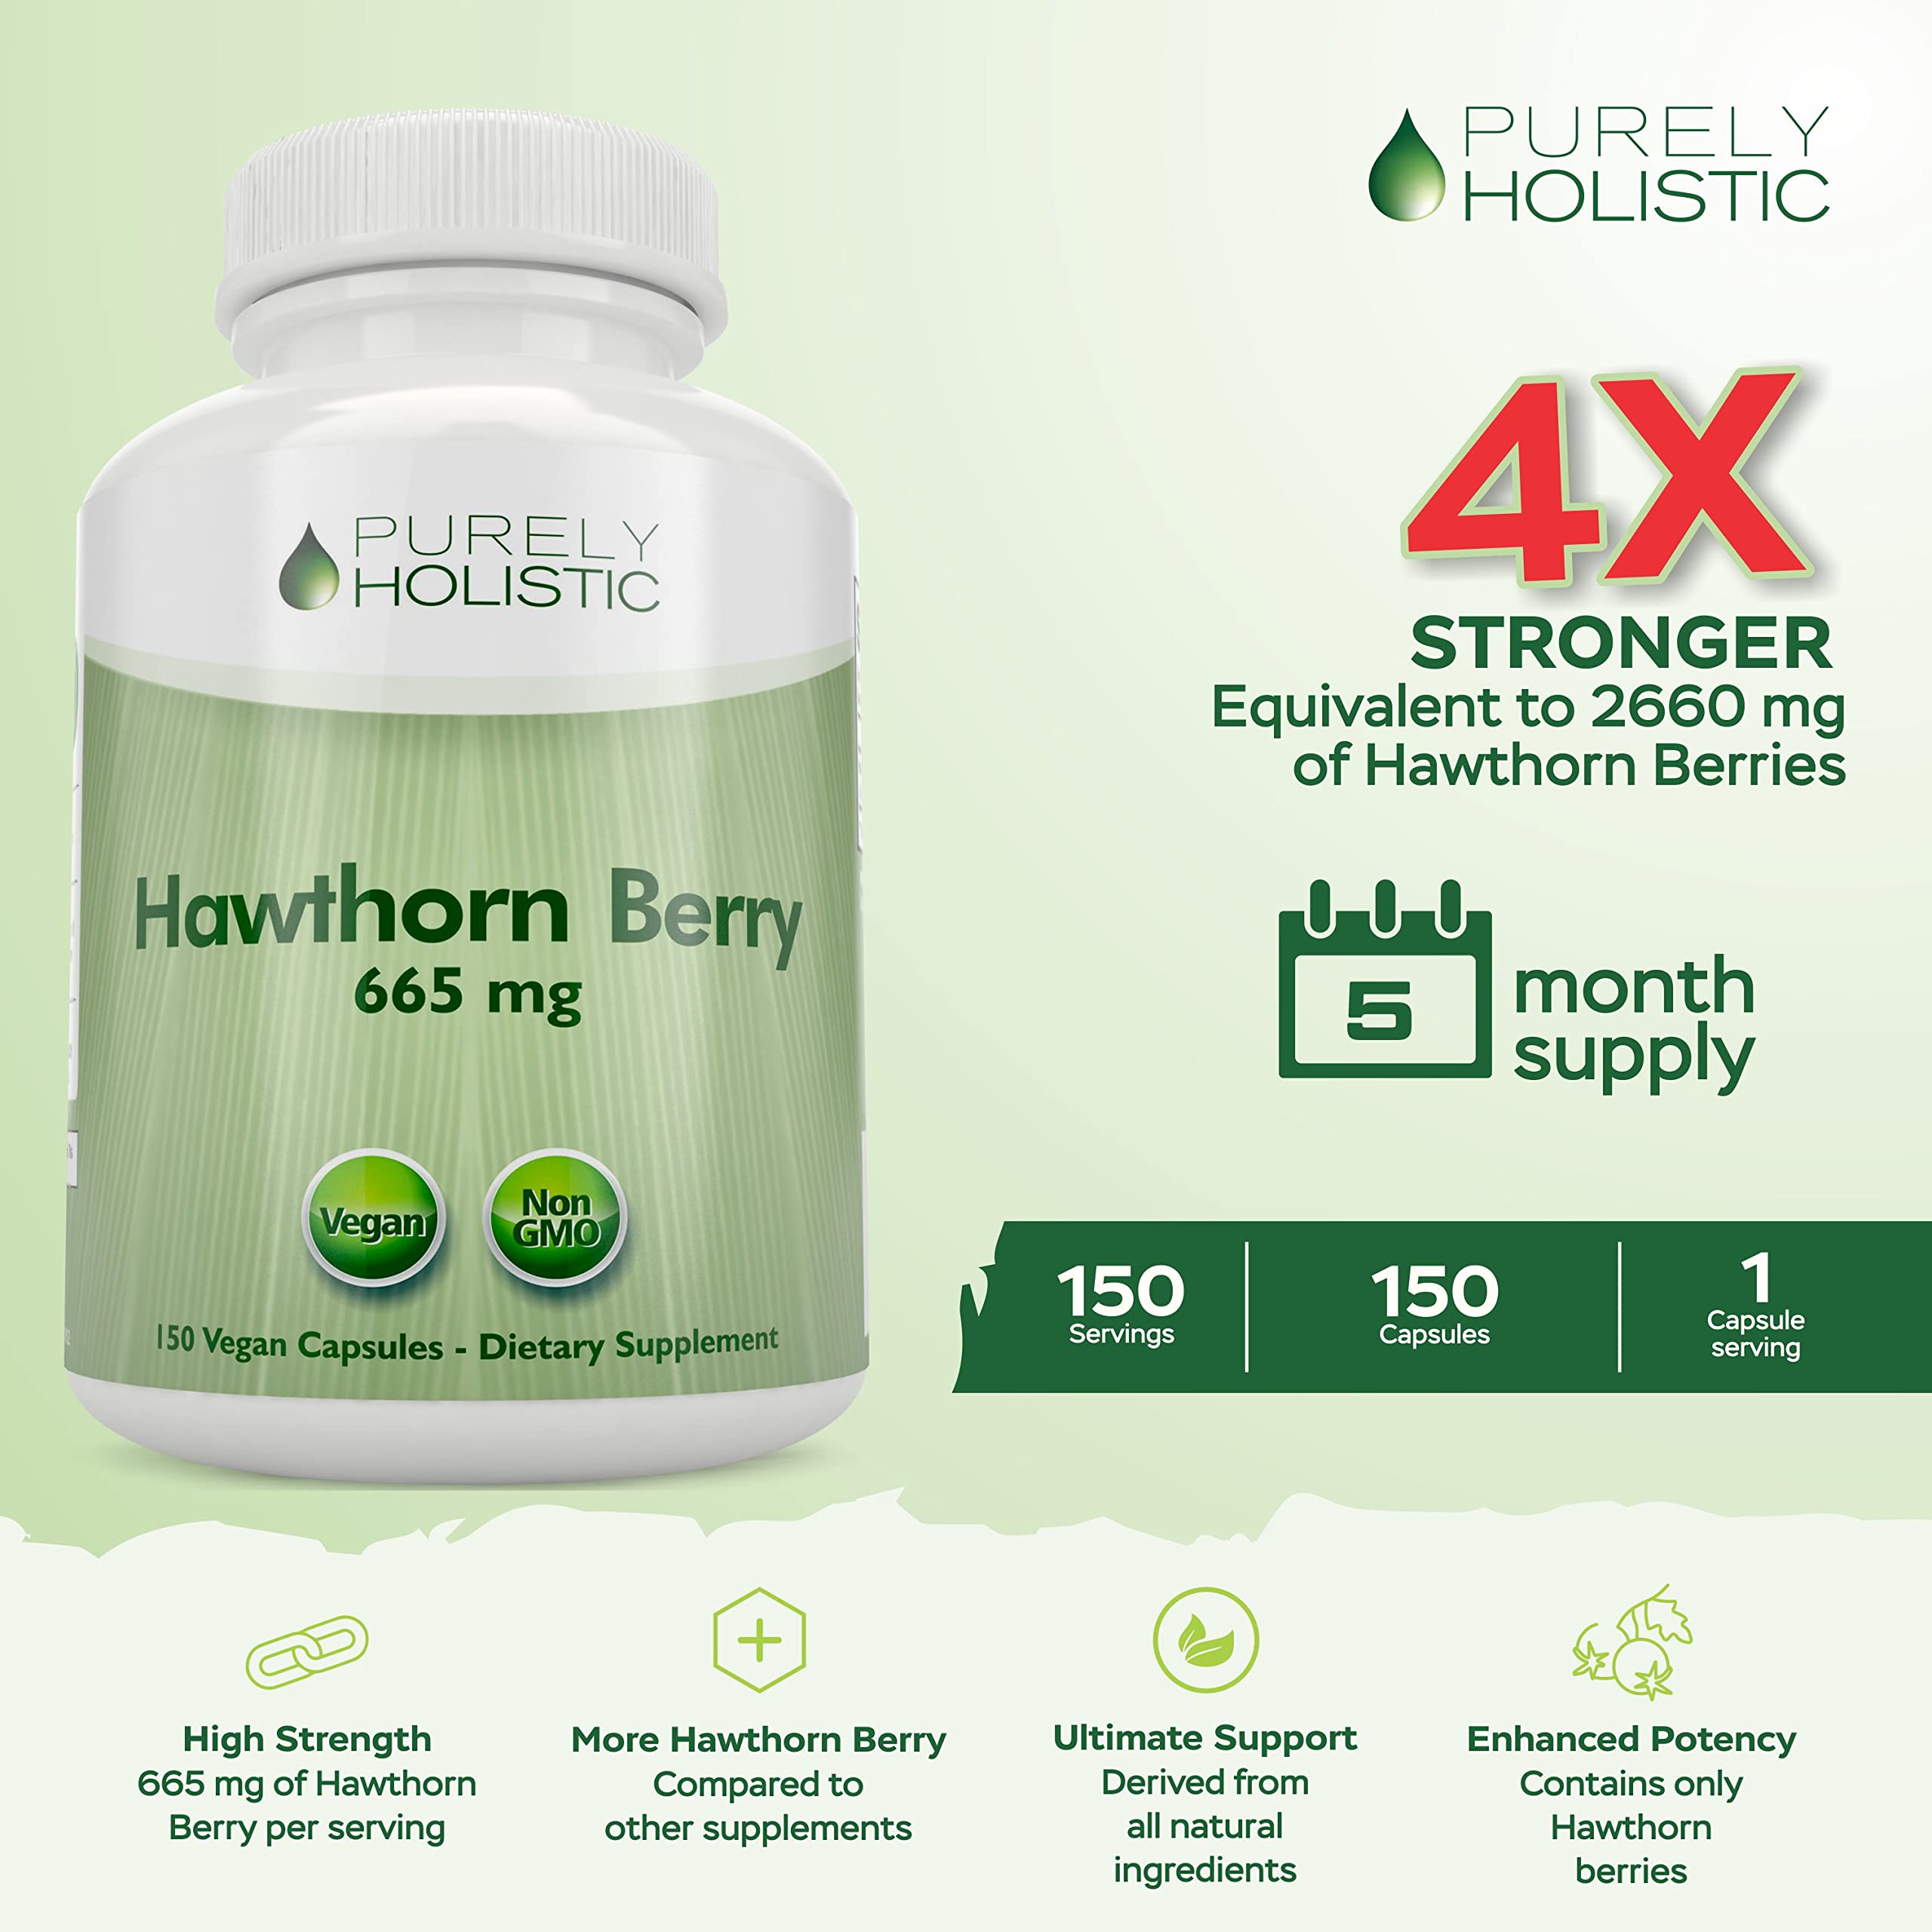 Purely Holistic Hawthorn Berry Capsules 150 Capsules for 5 Month Supply - High Strength 4:1 Hawthorn Extract - Non GMO - Vegan Hawthorne Supplement - Supports Cardiovascular & Digestive Health